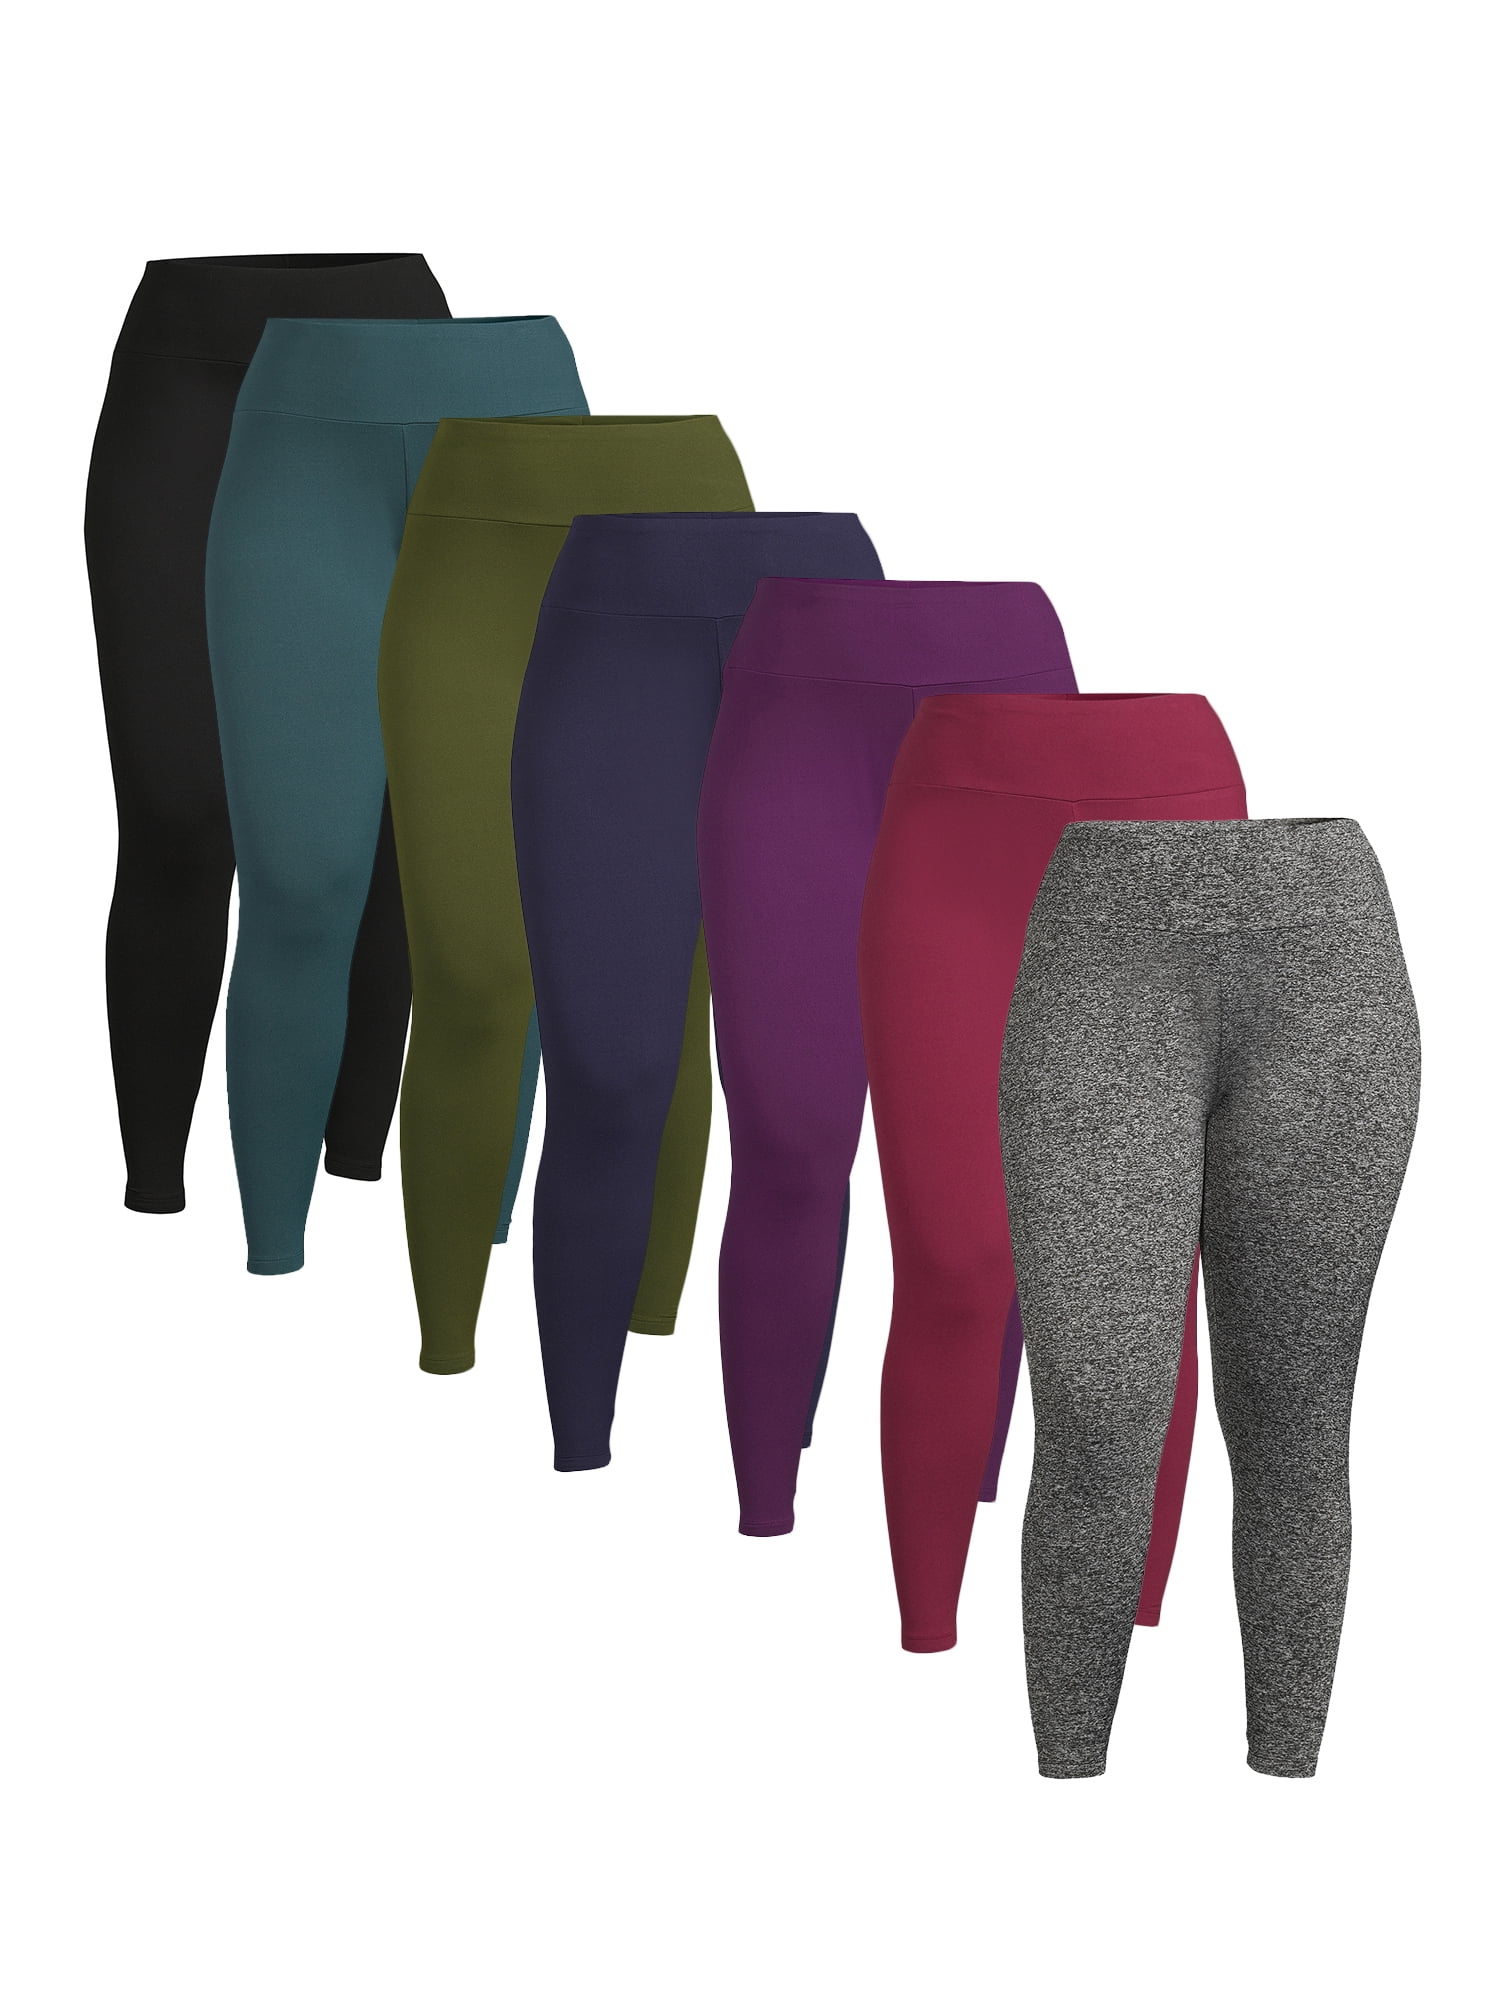 Buy Poly Deluxe Pocket Womens Plus Size Thermal Legging Garden